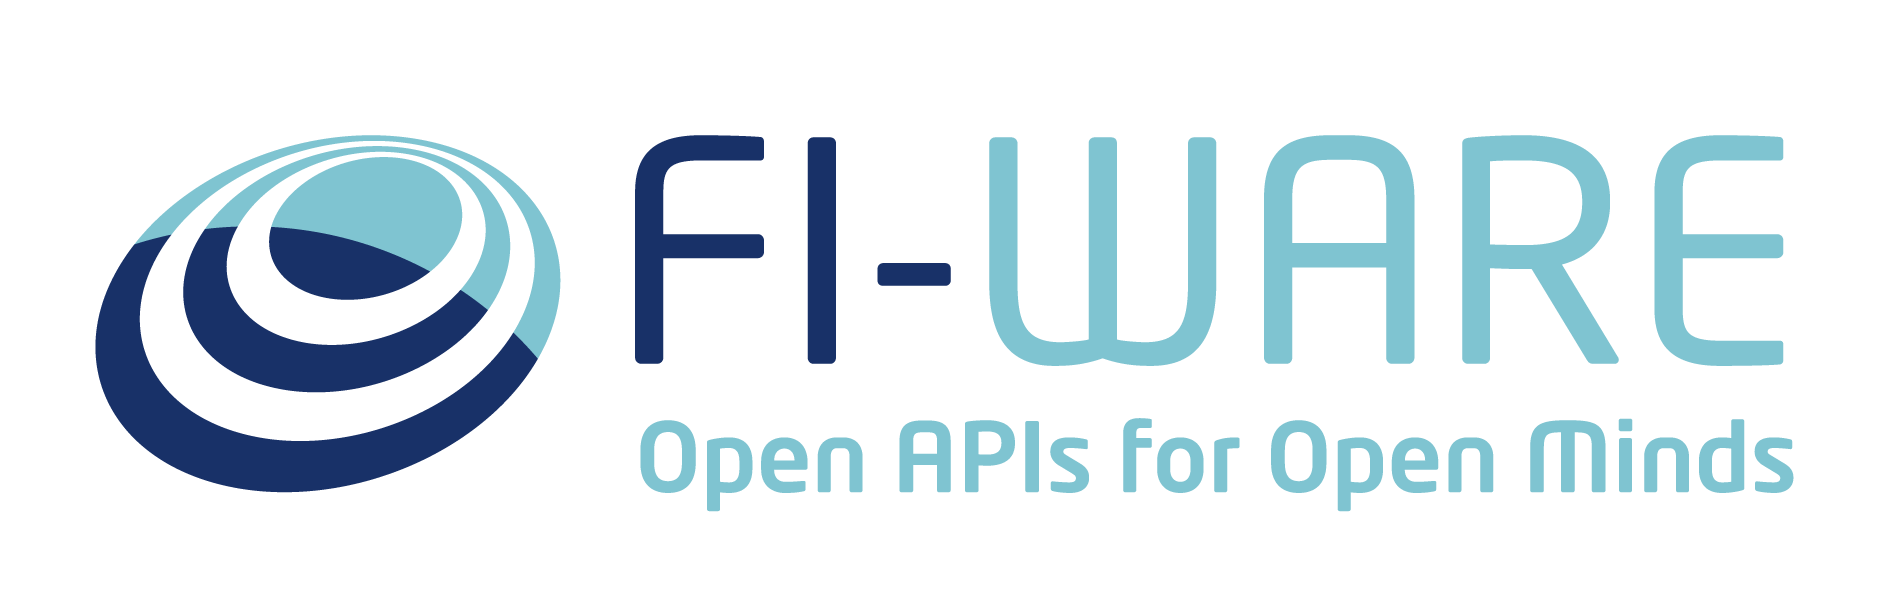 FI-WARE: Close to €1m Prizes for developers